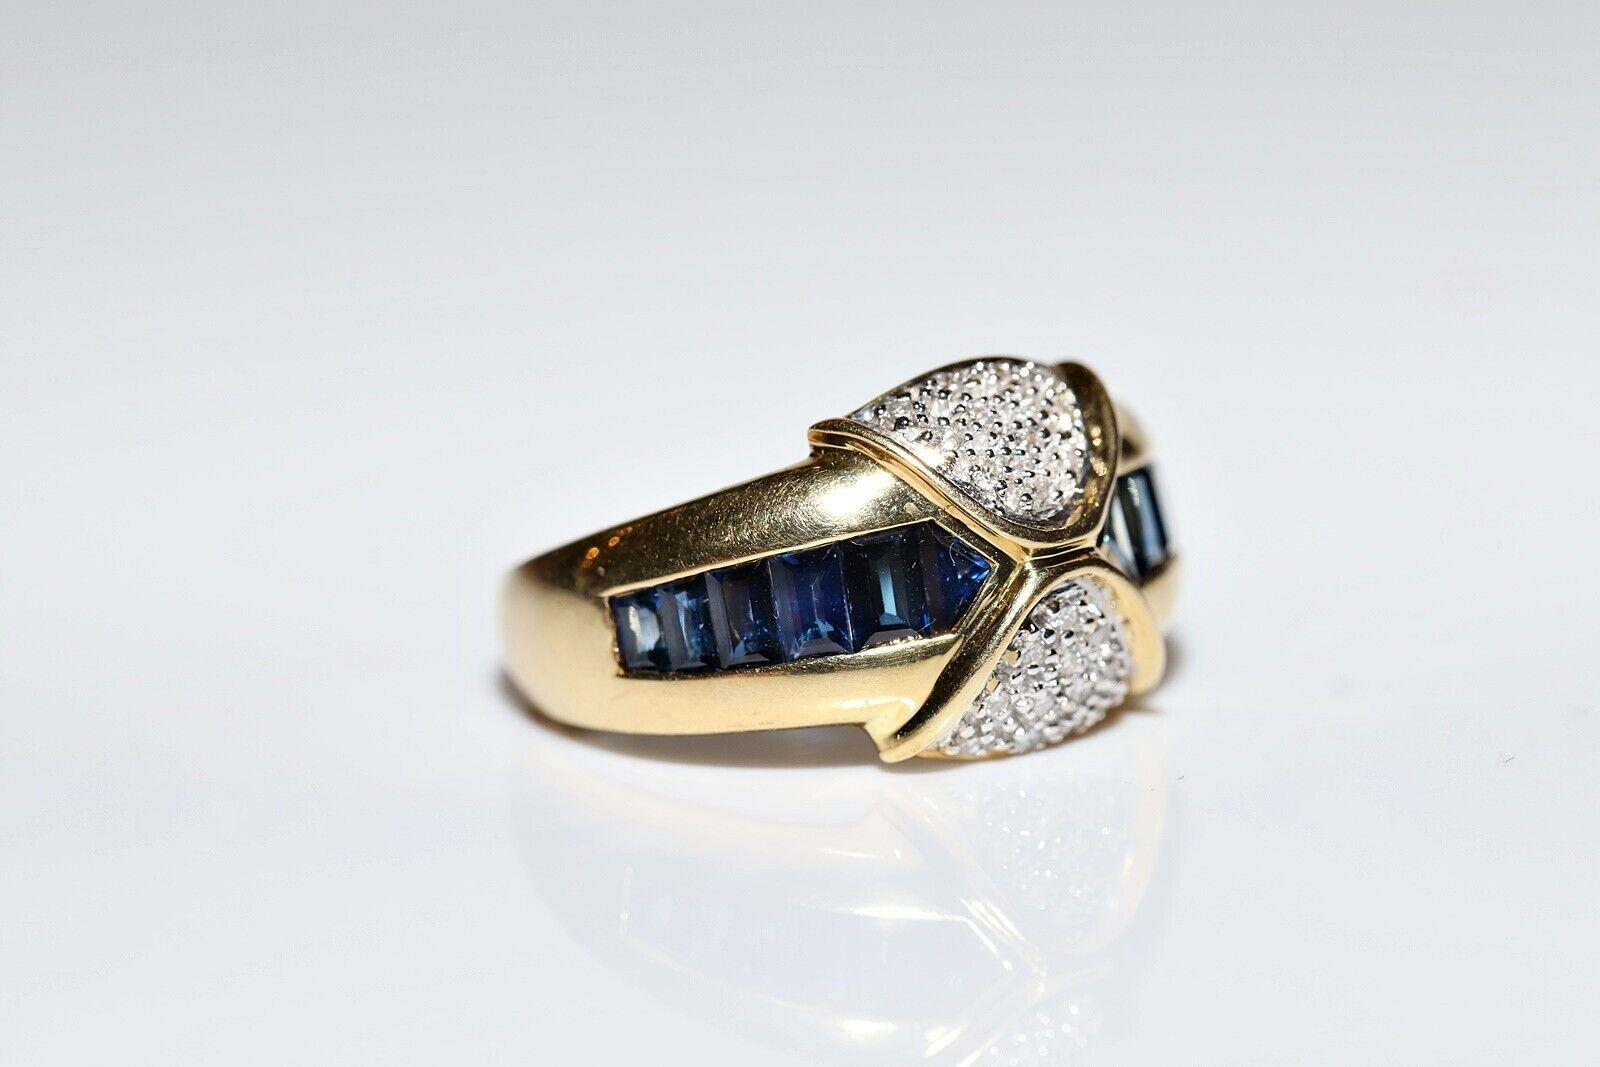  Vintage Circa 1980s 18k Gold Natural Diamond And Caliber Cut Sapphire Ring In Good Condition For Sale In Fatih/İstanbul, 34